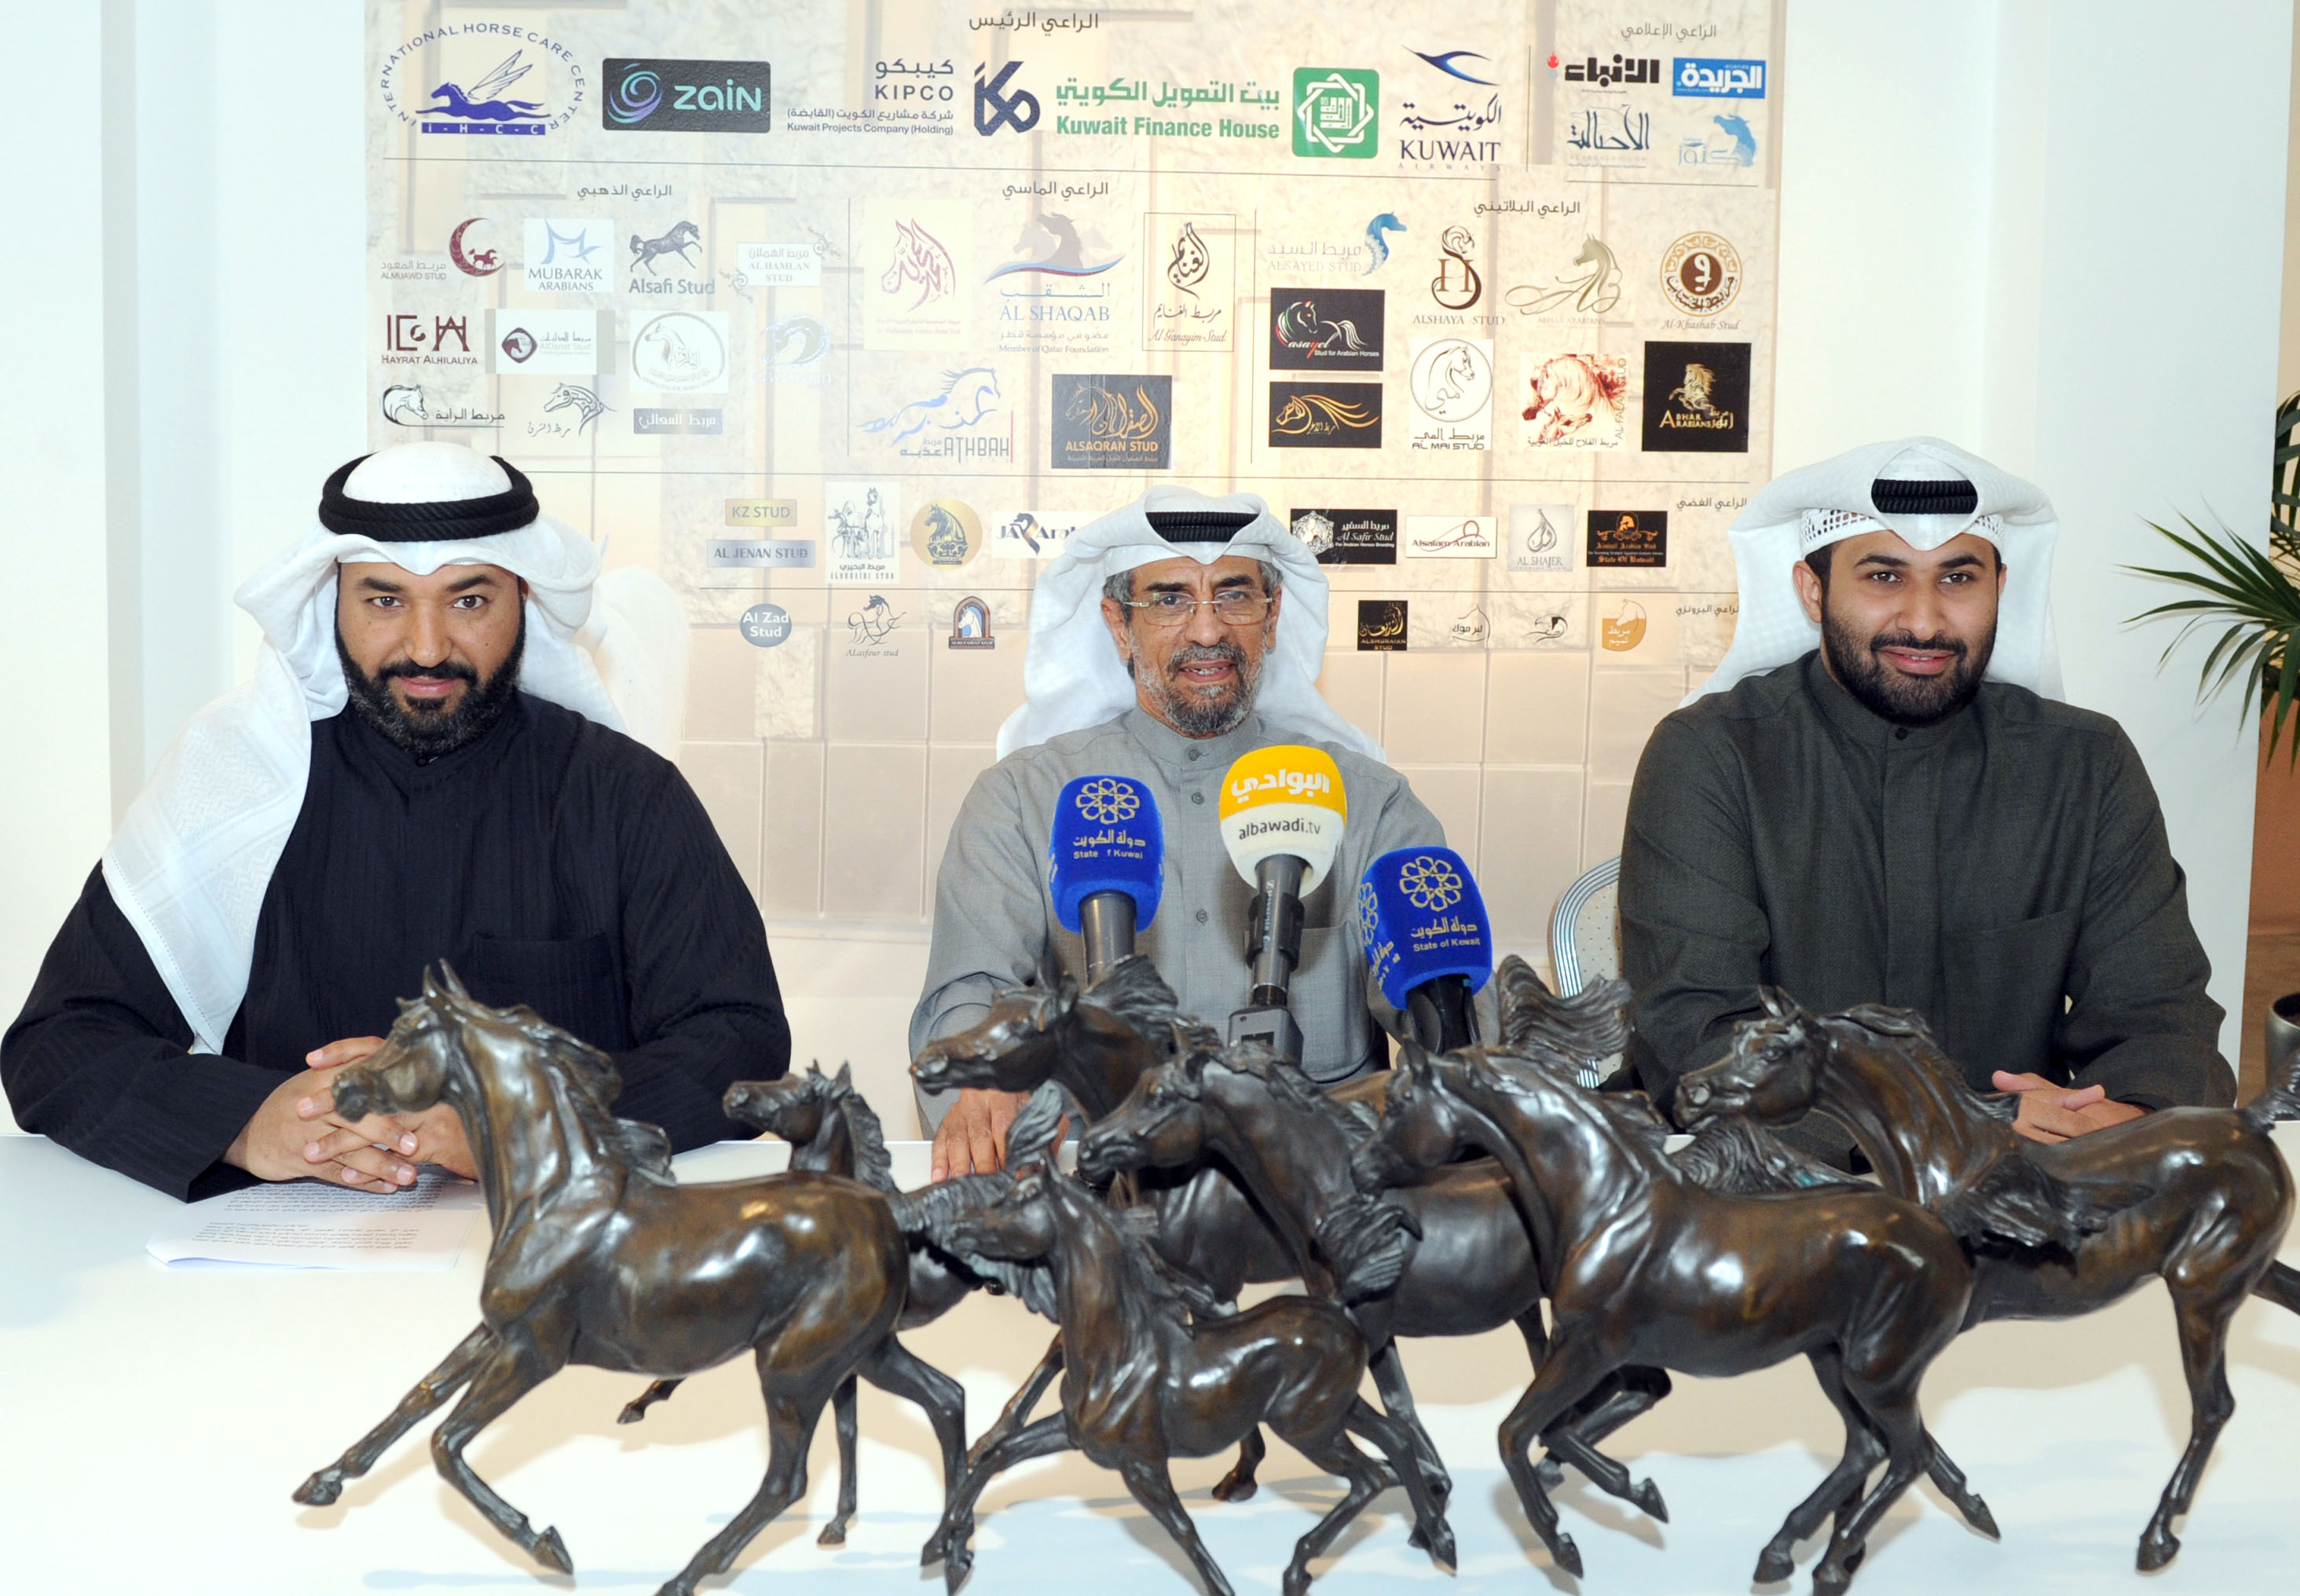 Event manager, Abdullah Al-Braihi during the news conference